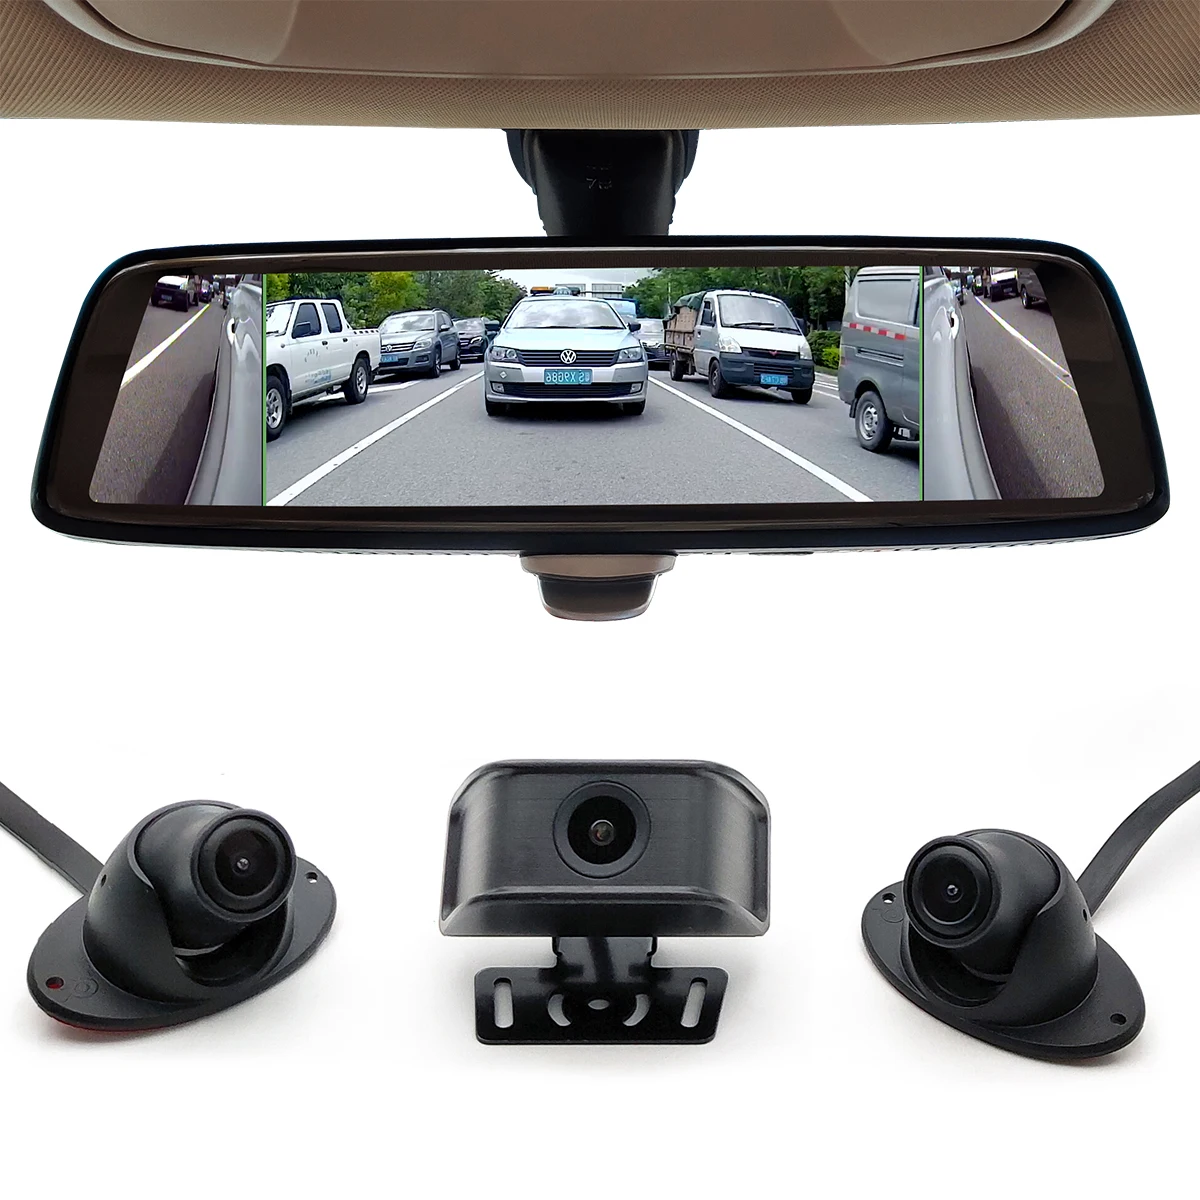 4K Mirror Dash Cam Front and Rear View Mirror Backup Camera 10'' IPS Full Touch Screen 1080P Reverse Camera Enhanced Night Vision for Cars with Parking Assist/Monitor Free 64GB Card ＆ 33ft Cable